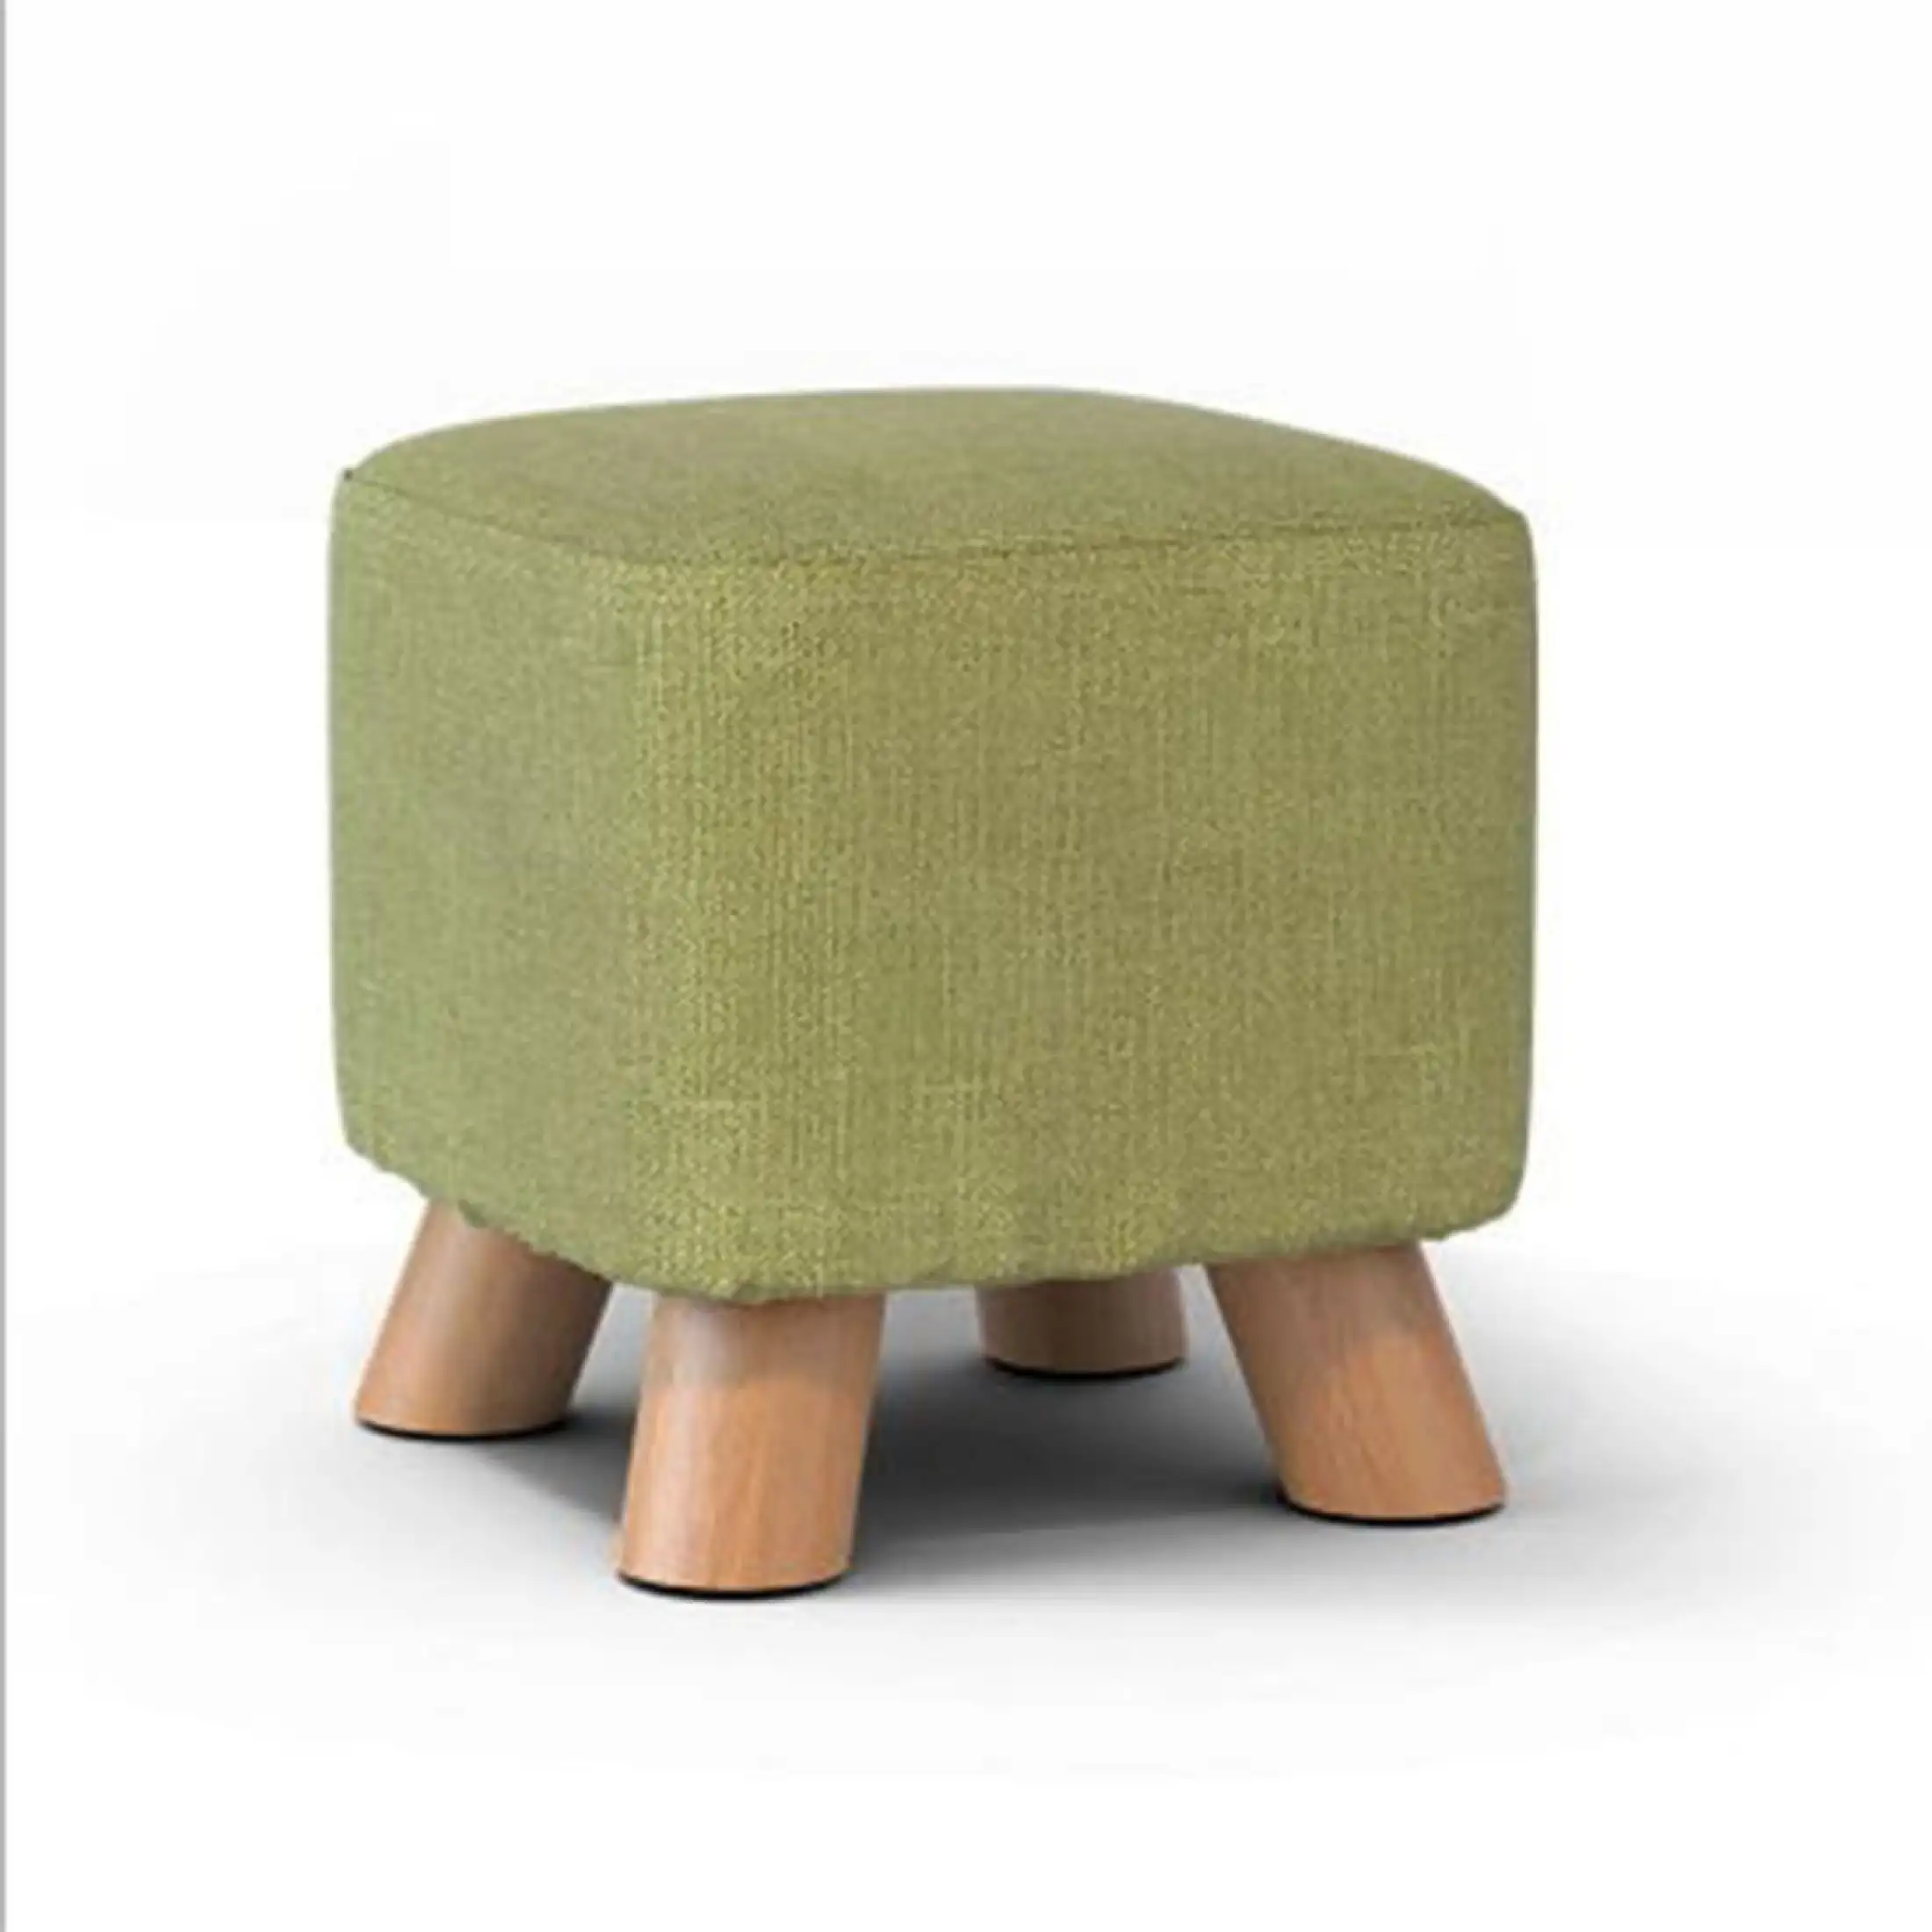 2Pcs Square Wooden Wood Footstool Ottoman Pouffe Chair Stool Fabric Cover